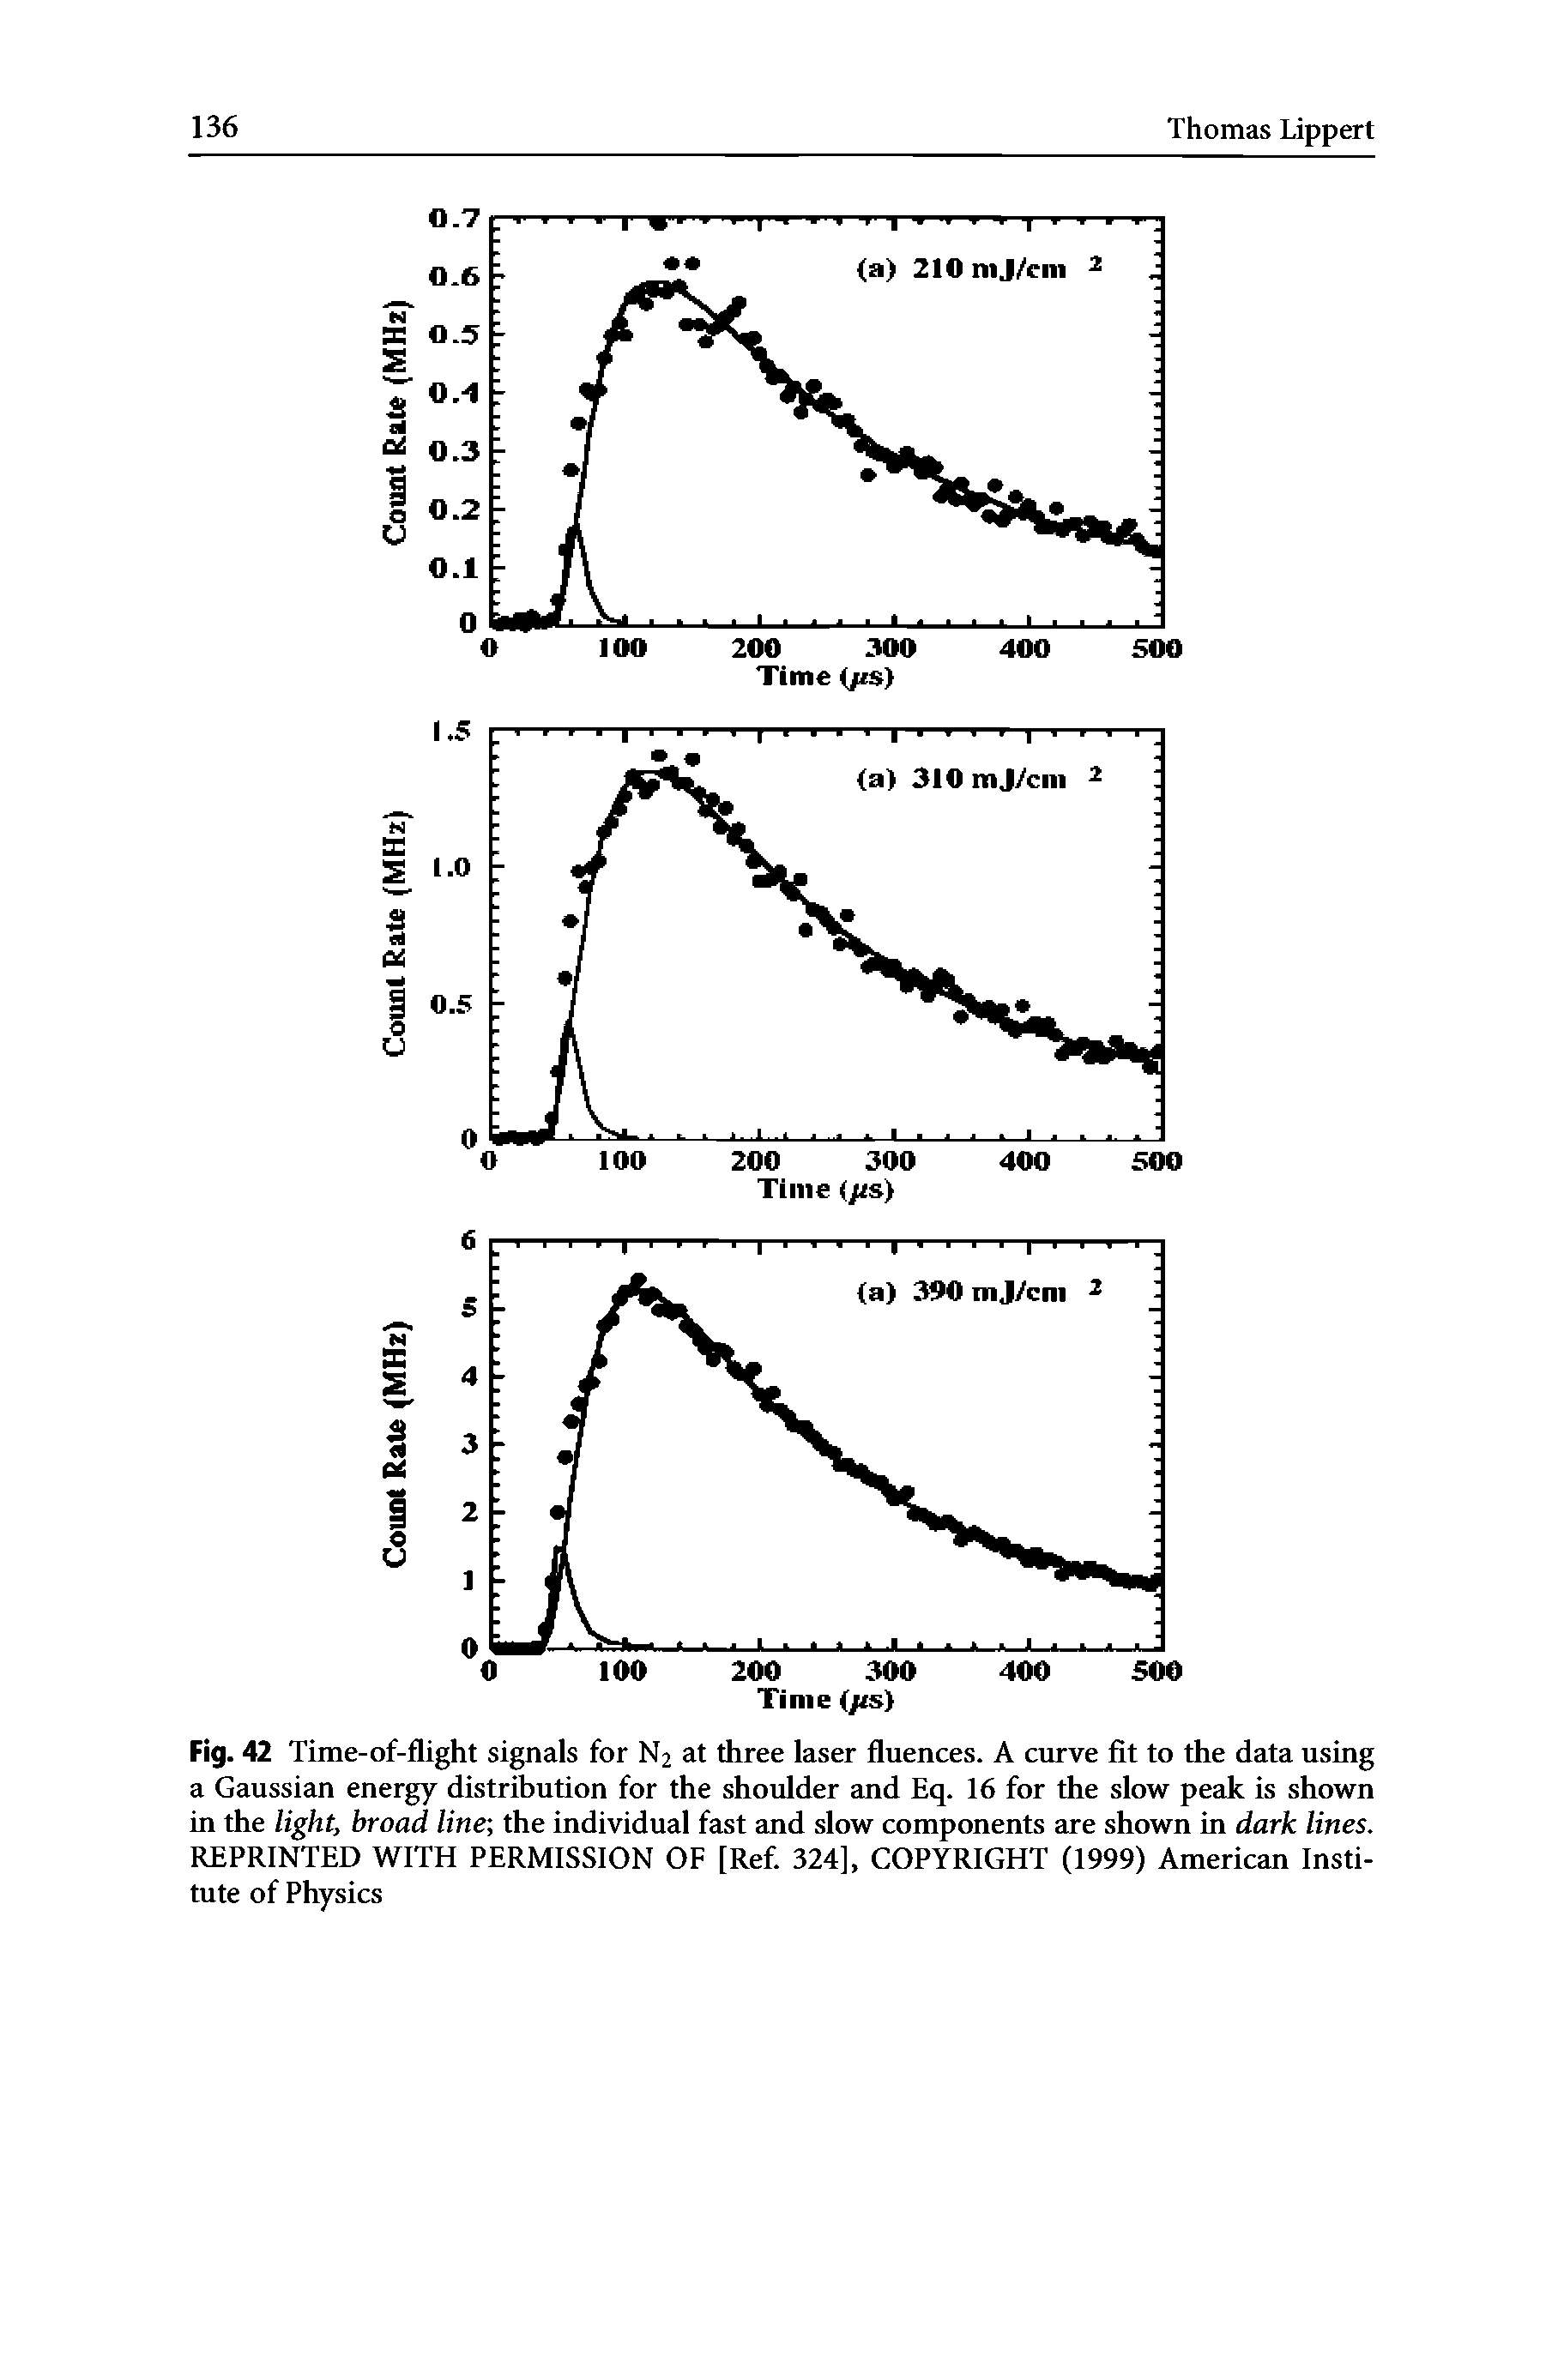 Fig. 42 Time-of-flight signals for N2 at three laser fluences. A curve fit to the data using a Gaussian energy distribution for the shoulder and Eq. 16 for the slow peak is shown in the light, broad line the individual fast and slow components are shown in dark lines. REPRINTED WITH PERMISSION OF [Ref. 324], COPYRIGHT (1999) American Institute of Physics...